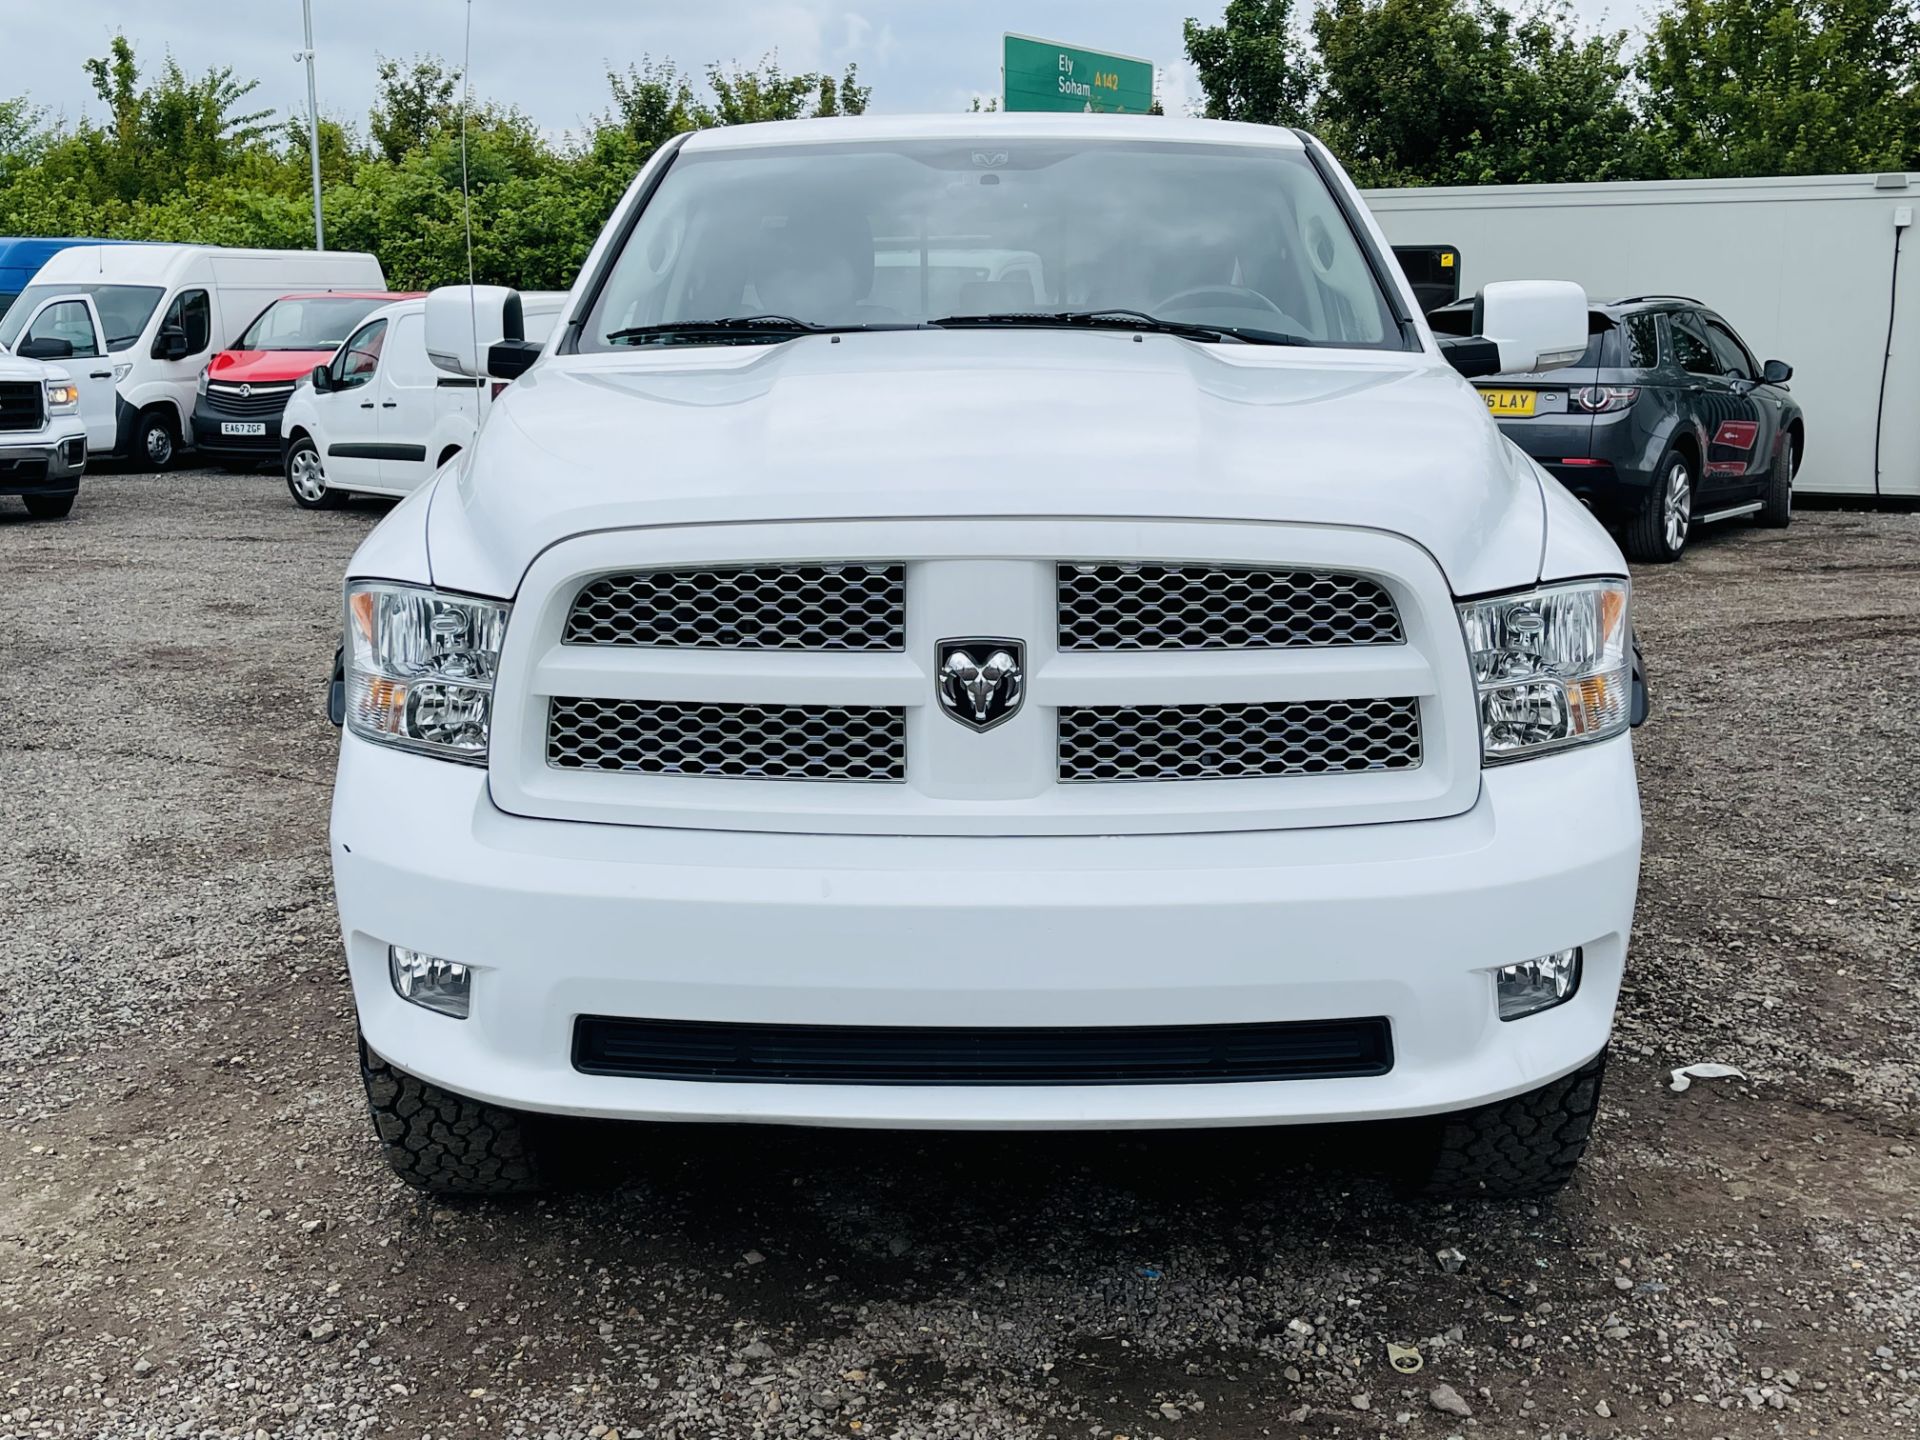 ** ON SALE ** Dodge Ram 5.7 Hemi V8 4x4 **Sport Edition** 2012 Year - Air con - Sport Pack - ** - Image 4 of 26